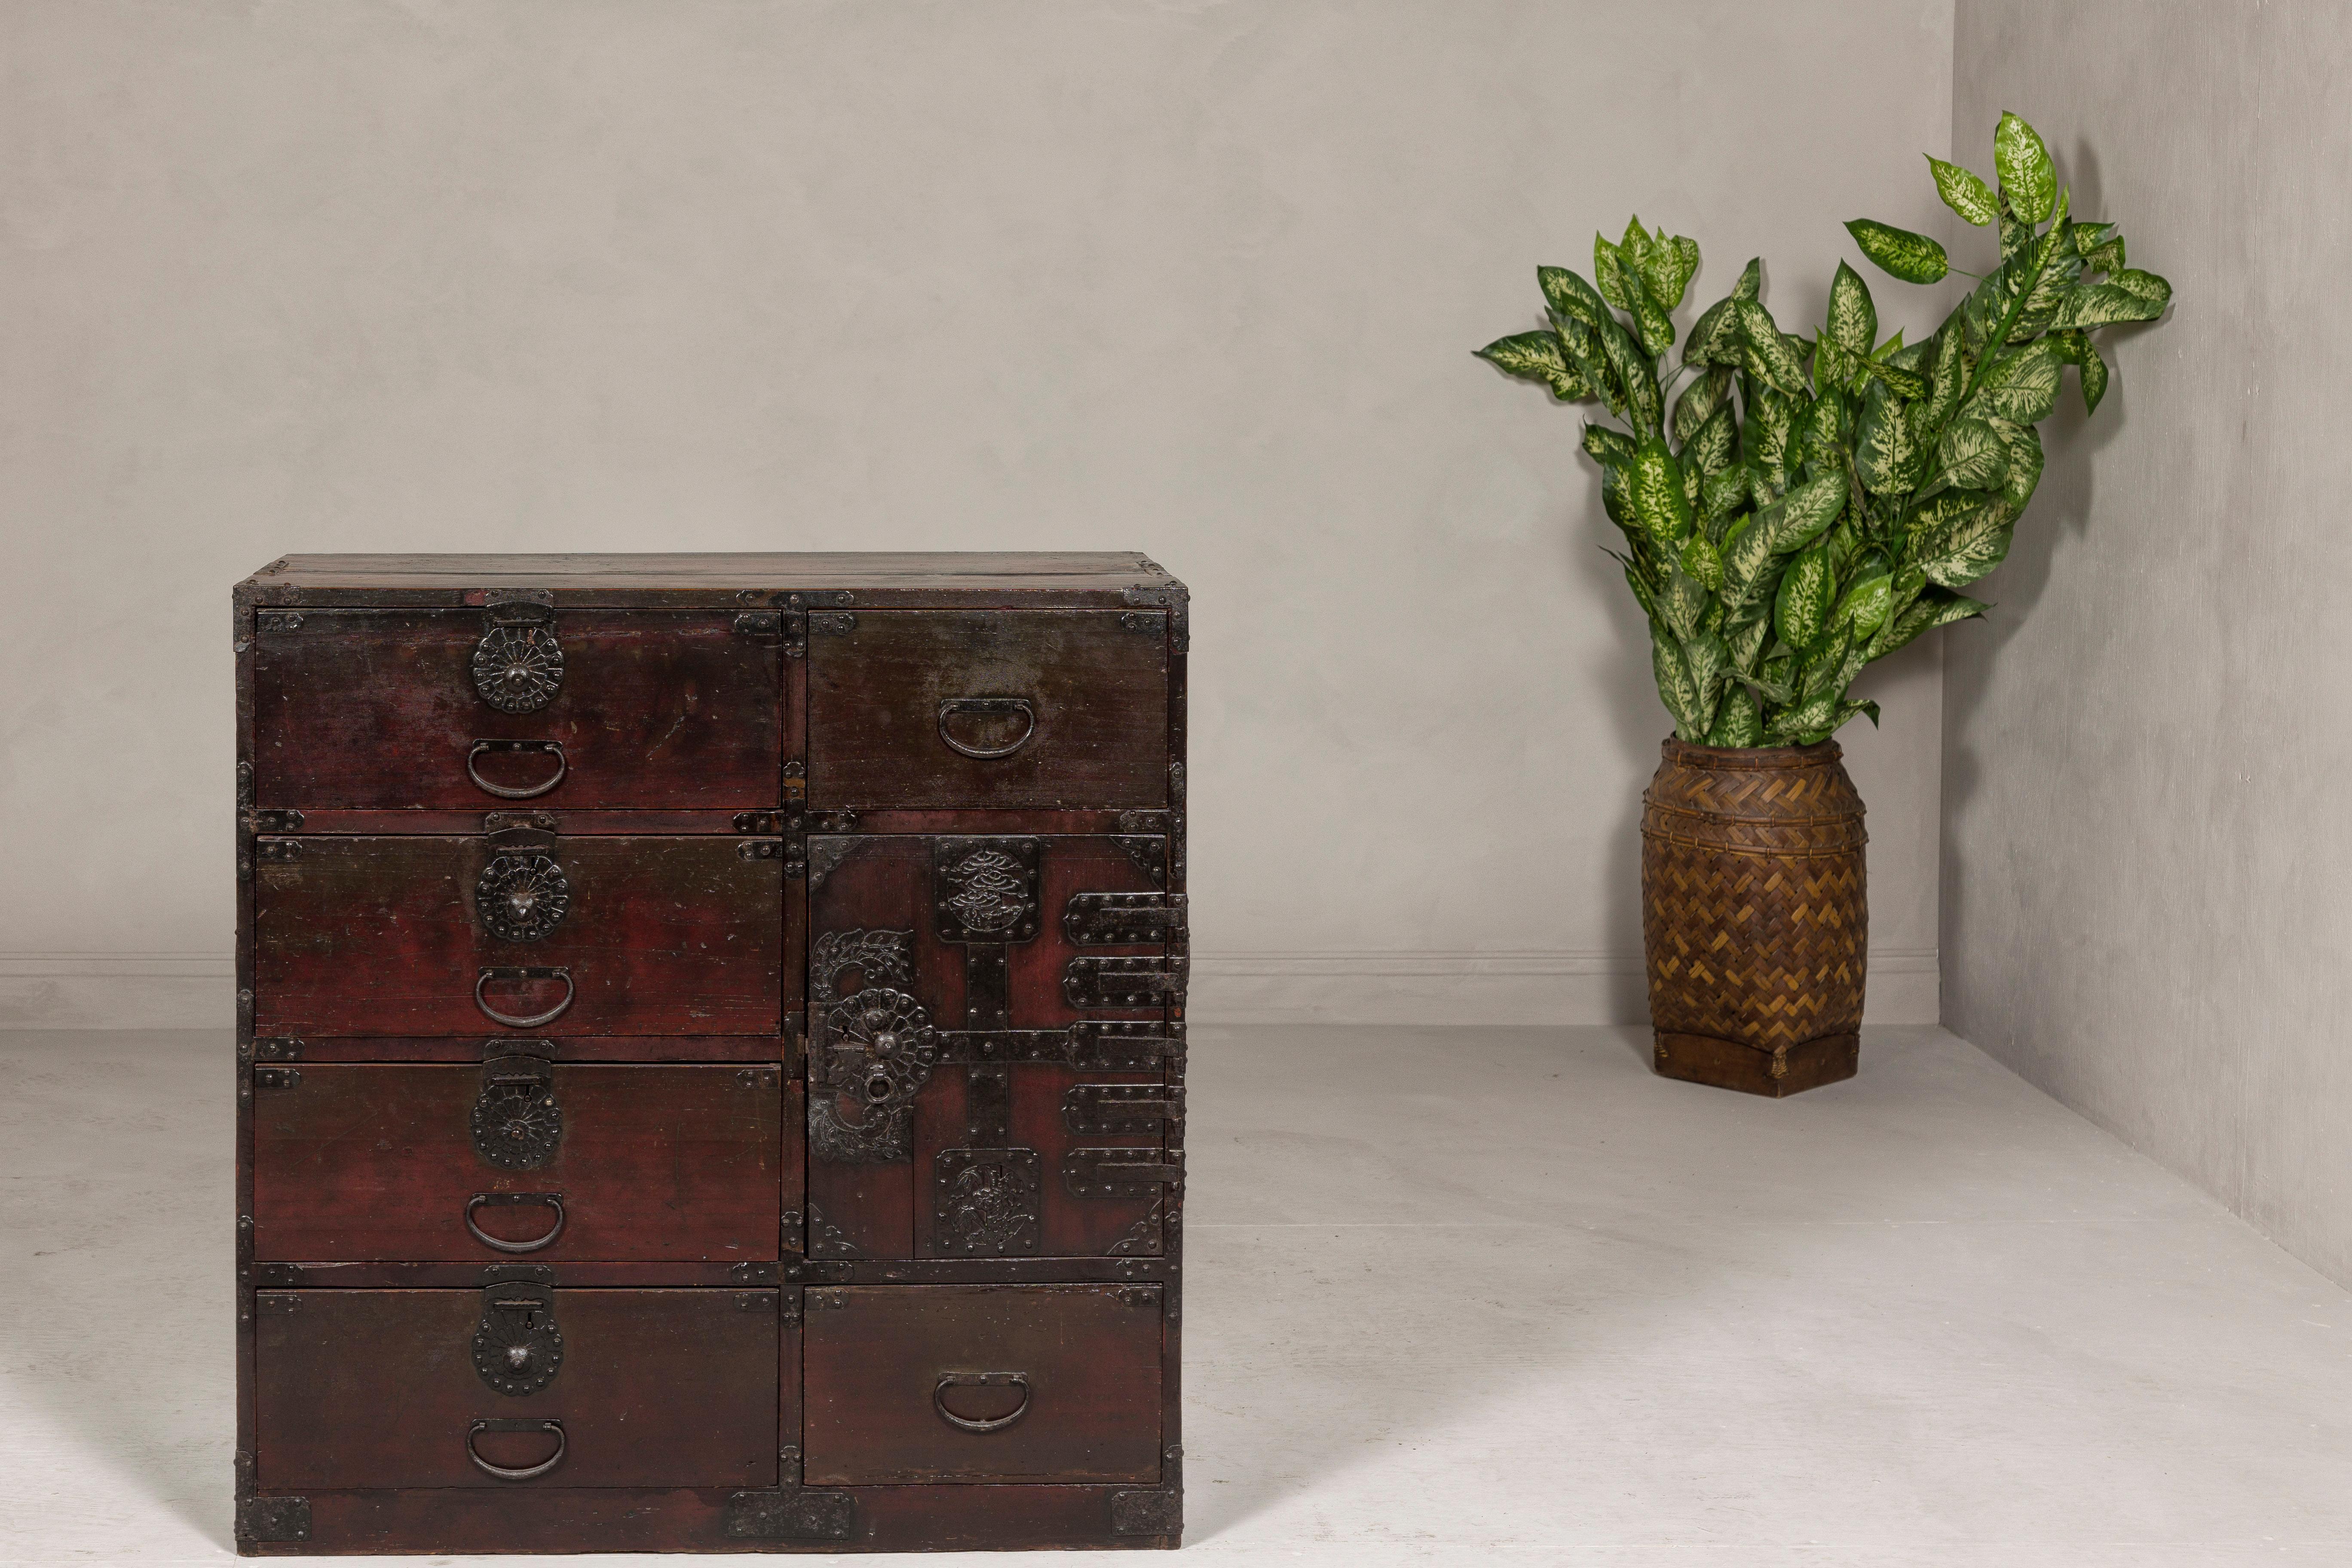 Japanese Meiji Period 19th Century Sendai Type Tansu Chest with Drawers and Safe In Good Condition For Sale In Yonkers, NY